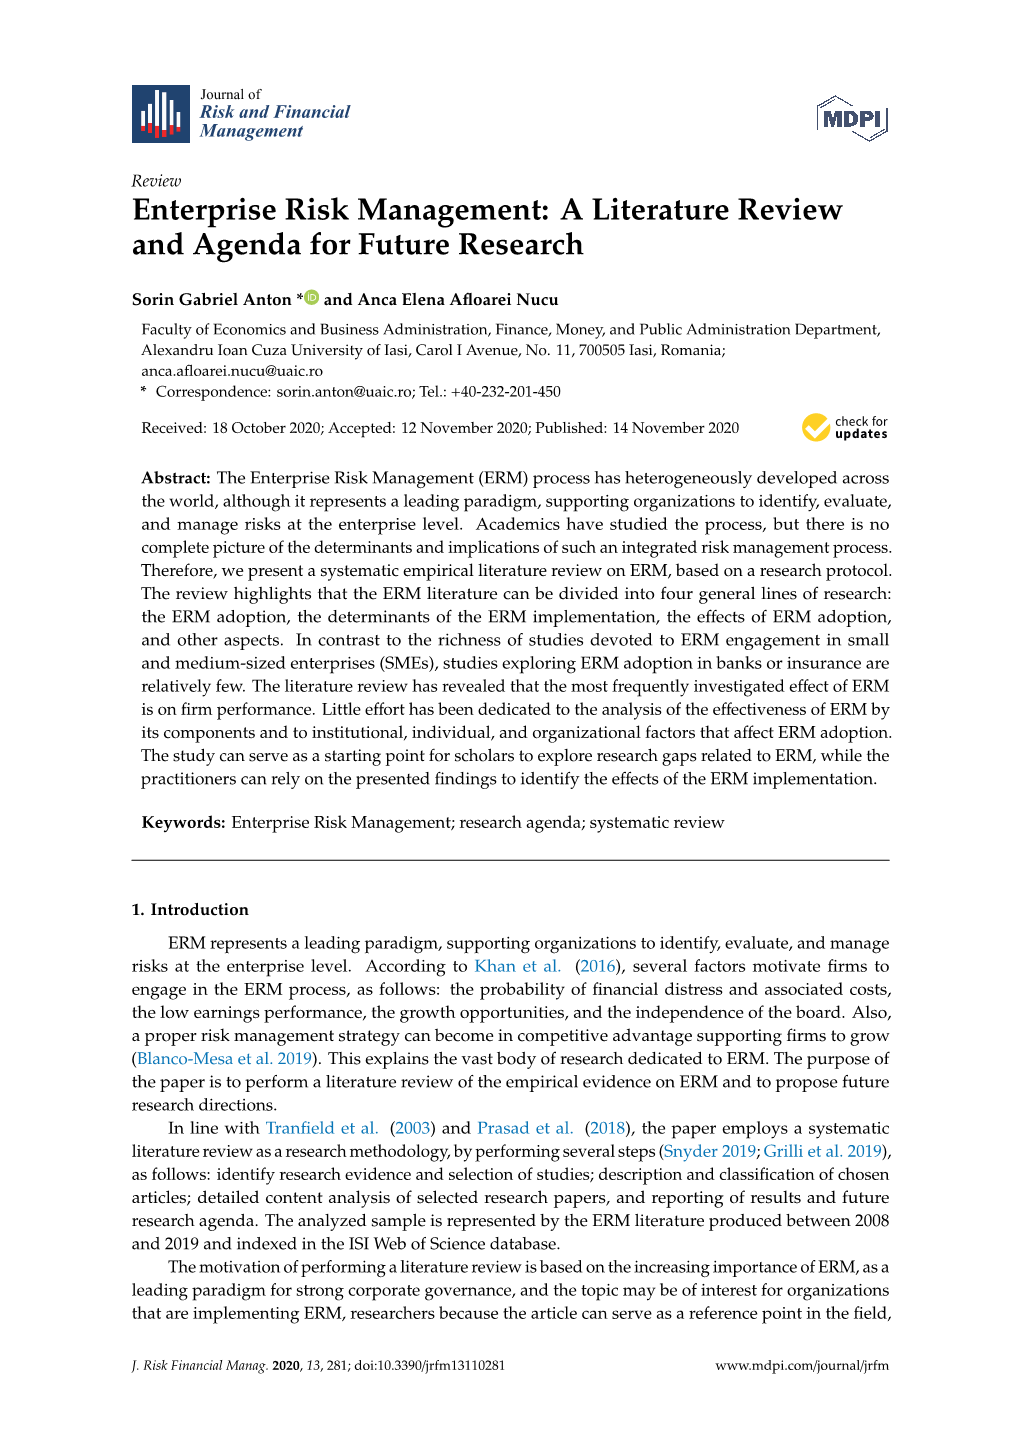 Enterprise Risk Management: a Literature Review and Agenda for Future Research